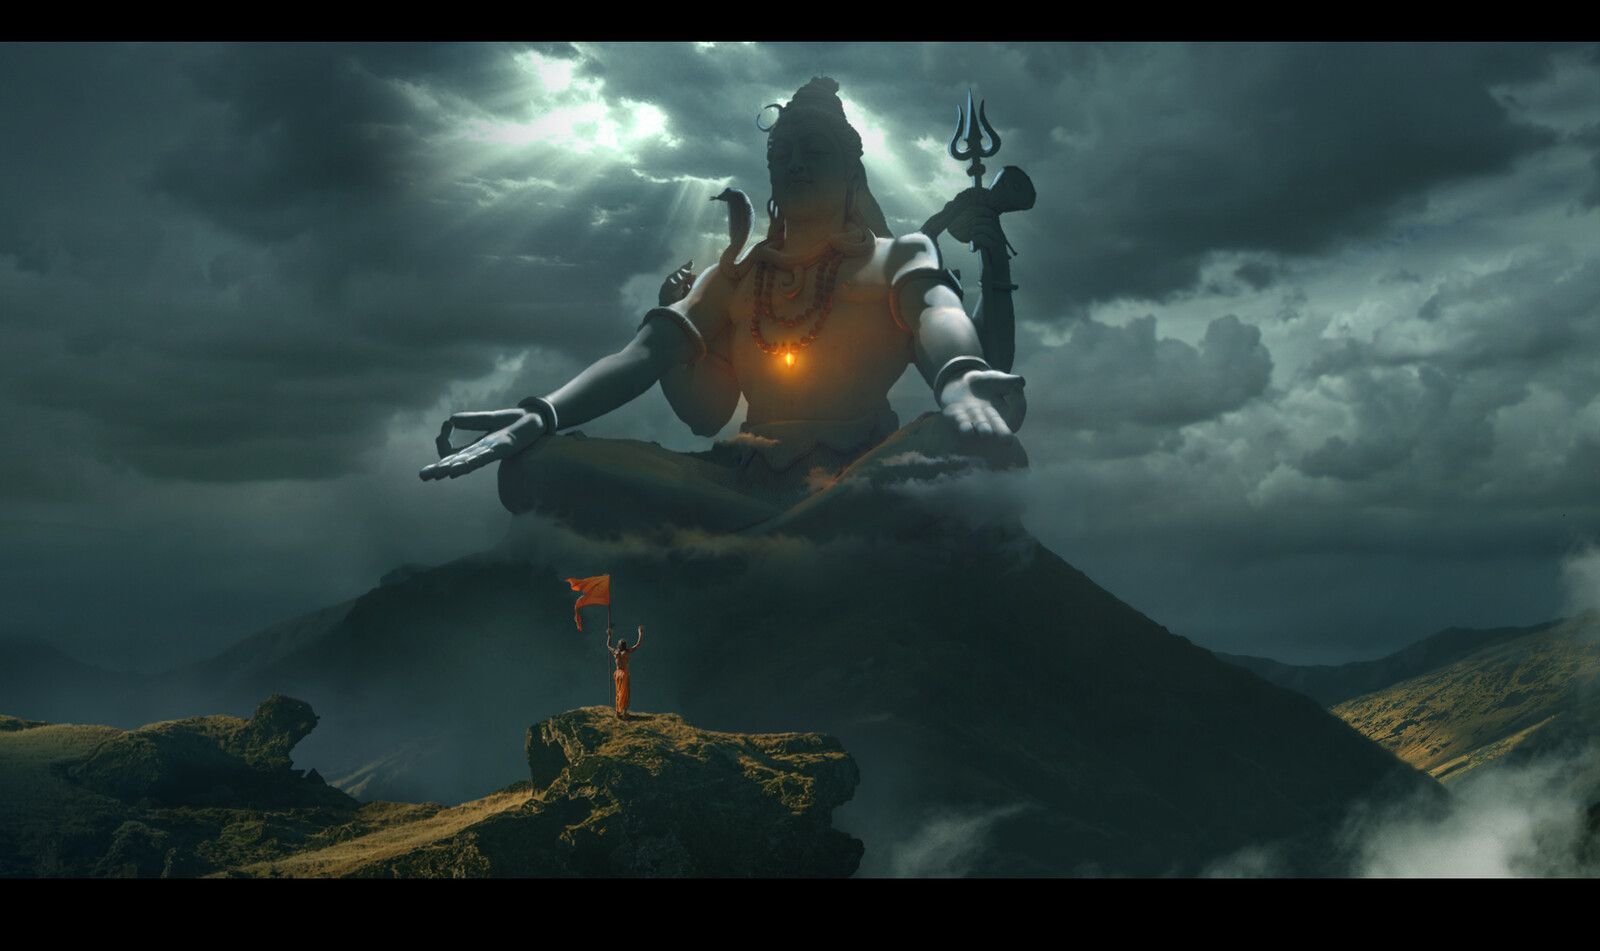 View 27 Lord Shiva Hd Wallpapers 1920X1080 Download For Laptop